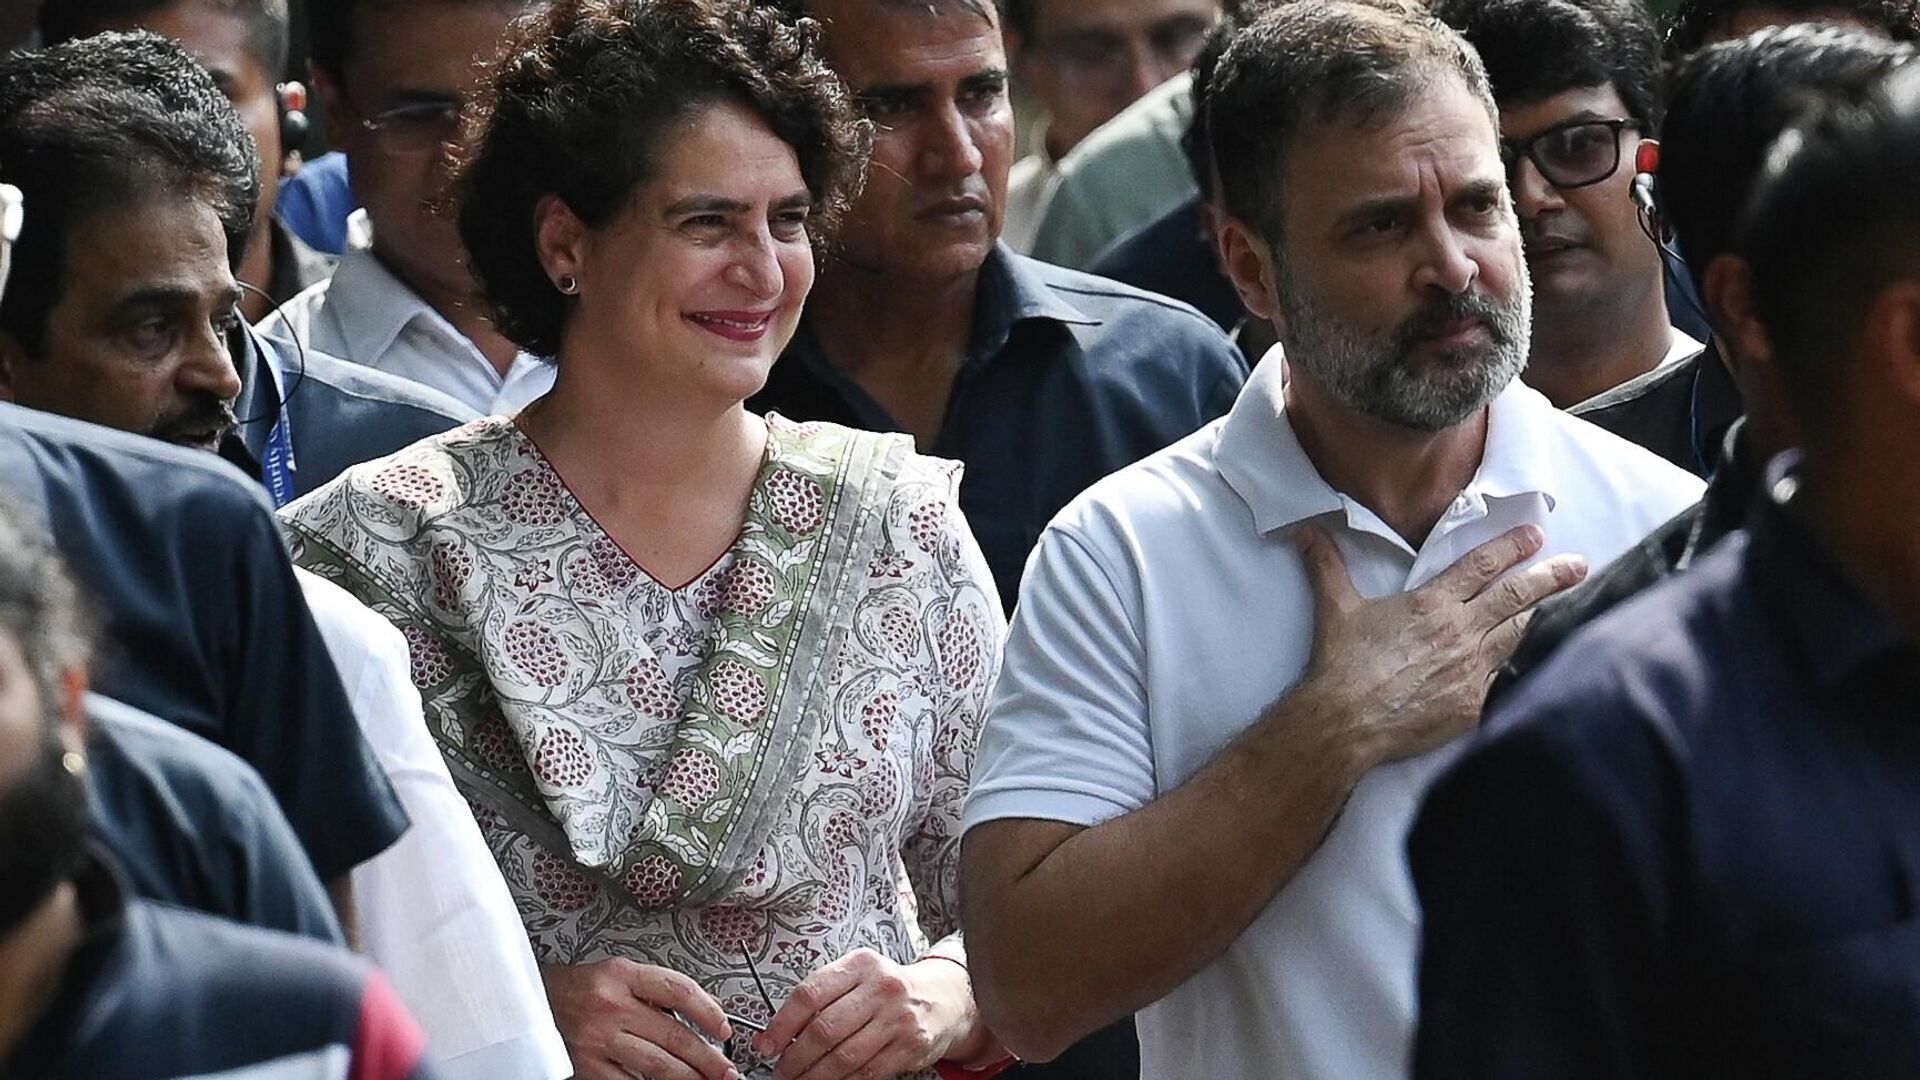 Congress party leader Rahul Gandhi (centre R) arrives with Priyanka Gandhi Vadra (centre L) at the party headquarters in New Delhi on August 4, 2023, after the Supreme Court suspended his defamation conviction. India's top court on August 4 suspended the defamation conviction of Rahul Gandhi, a decision that could pave the way for the senior opposition politician to return to parliament after his disqualification.  - Sputnik भारत, 1920, 07.09.2023